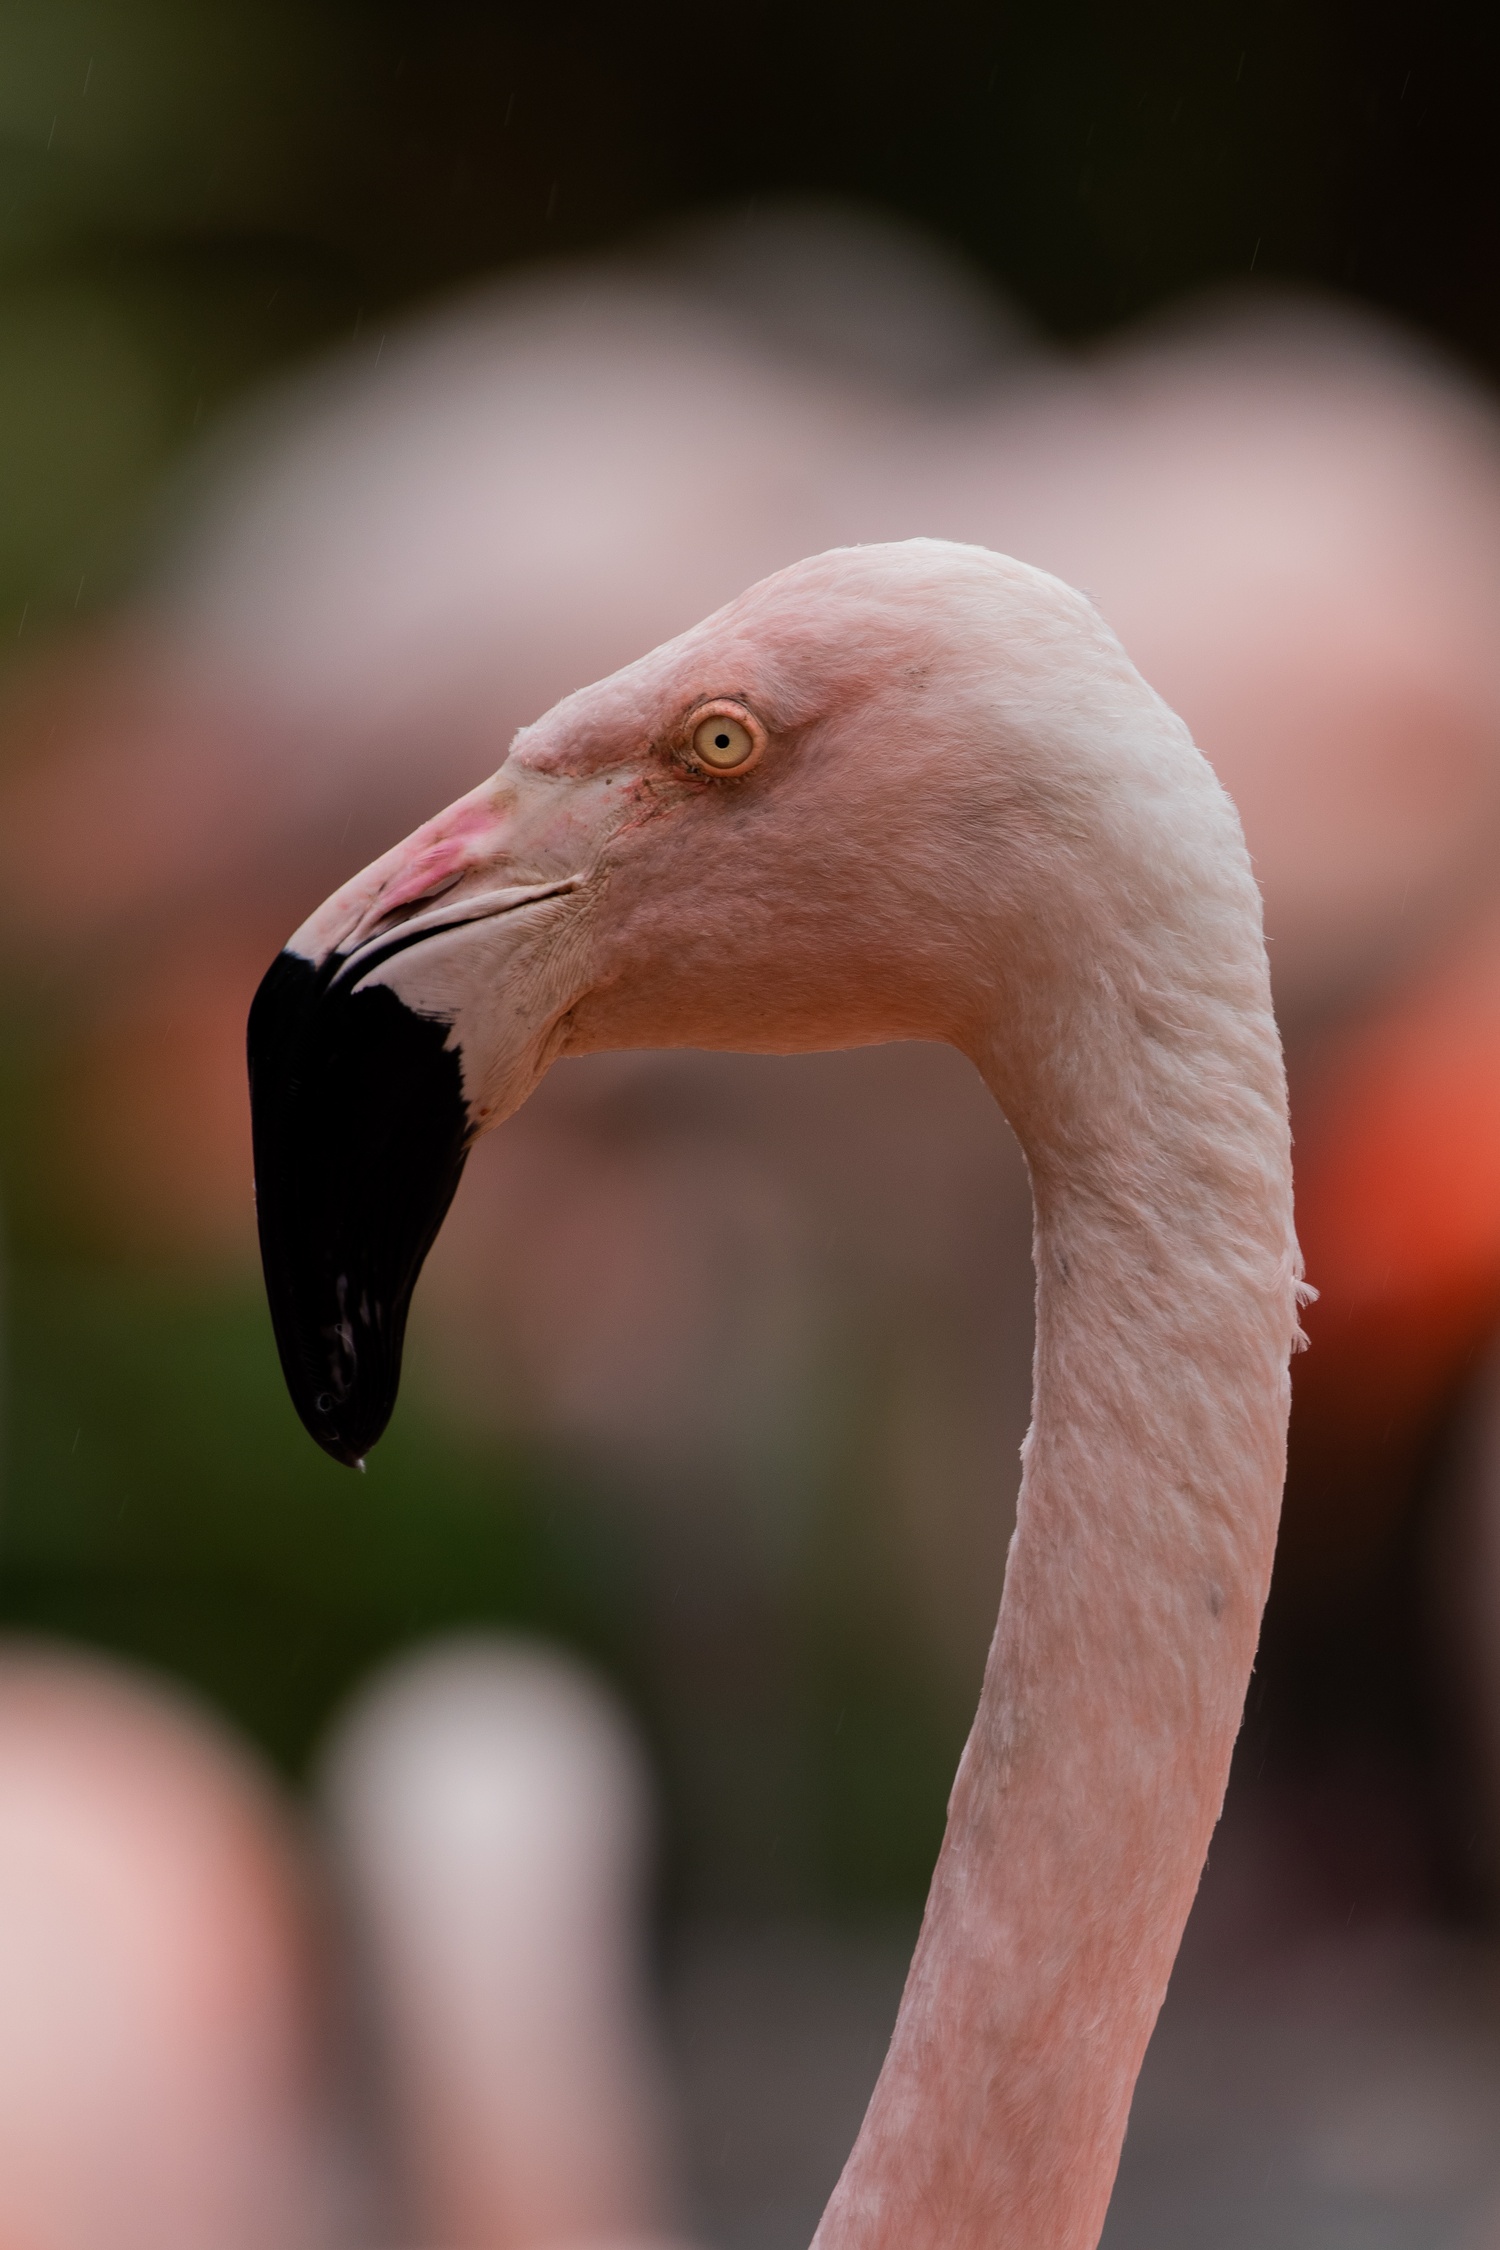 A chilean flamingo's head and neck in profile with many other flamingos blurred in the background